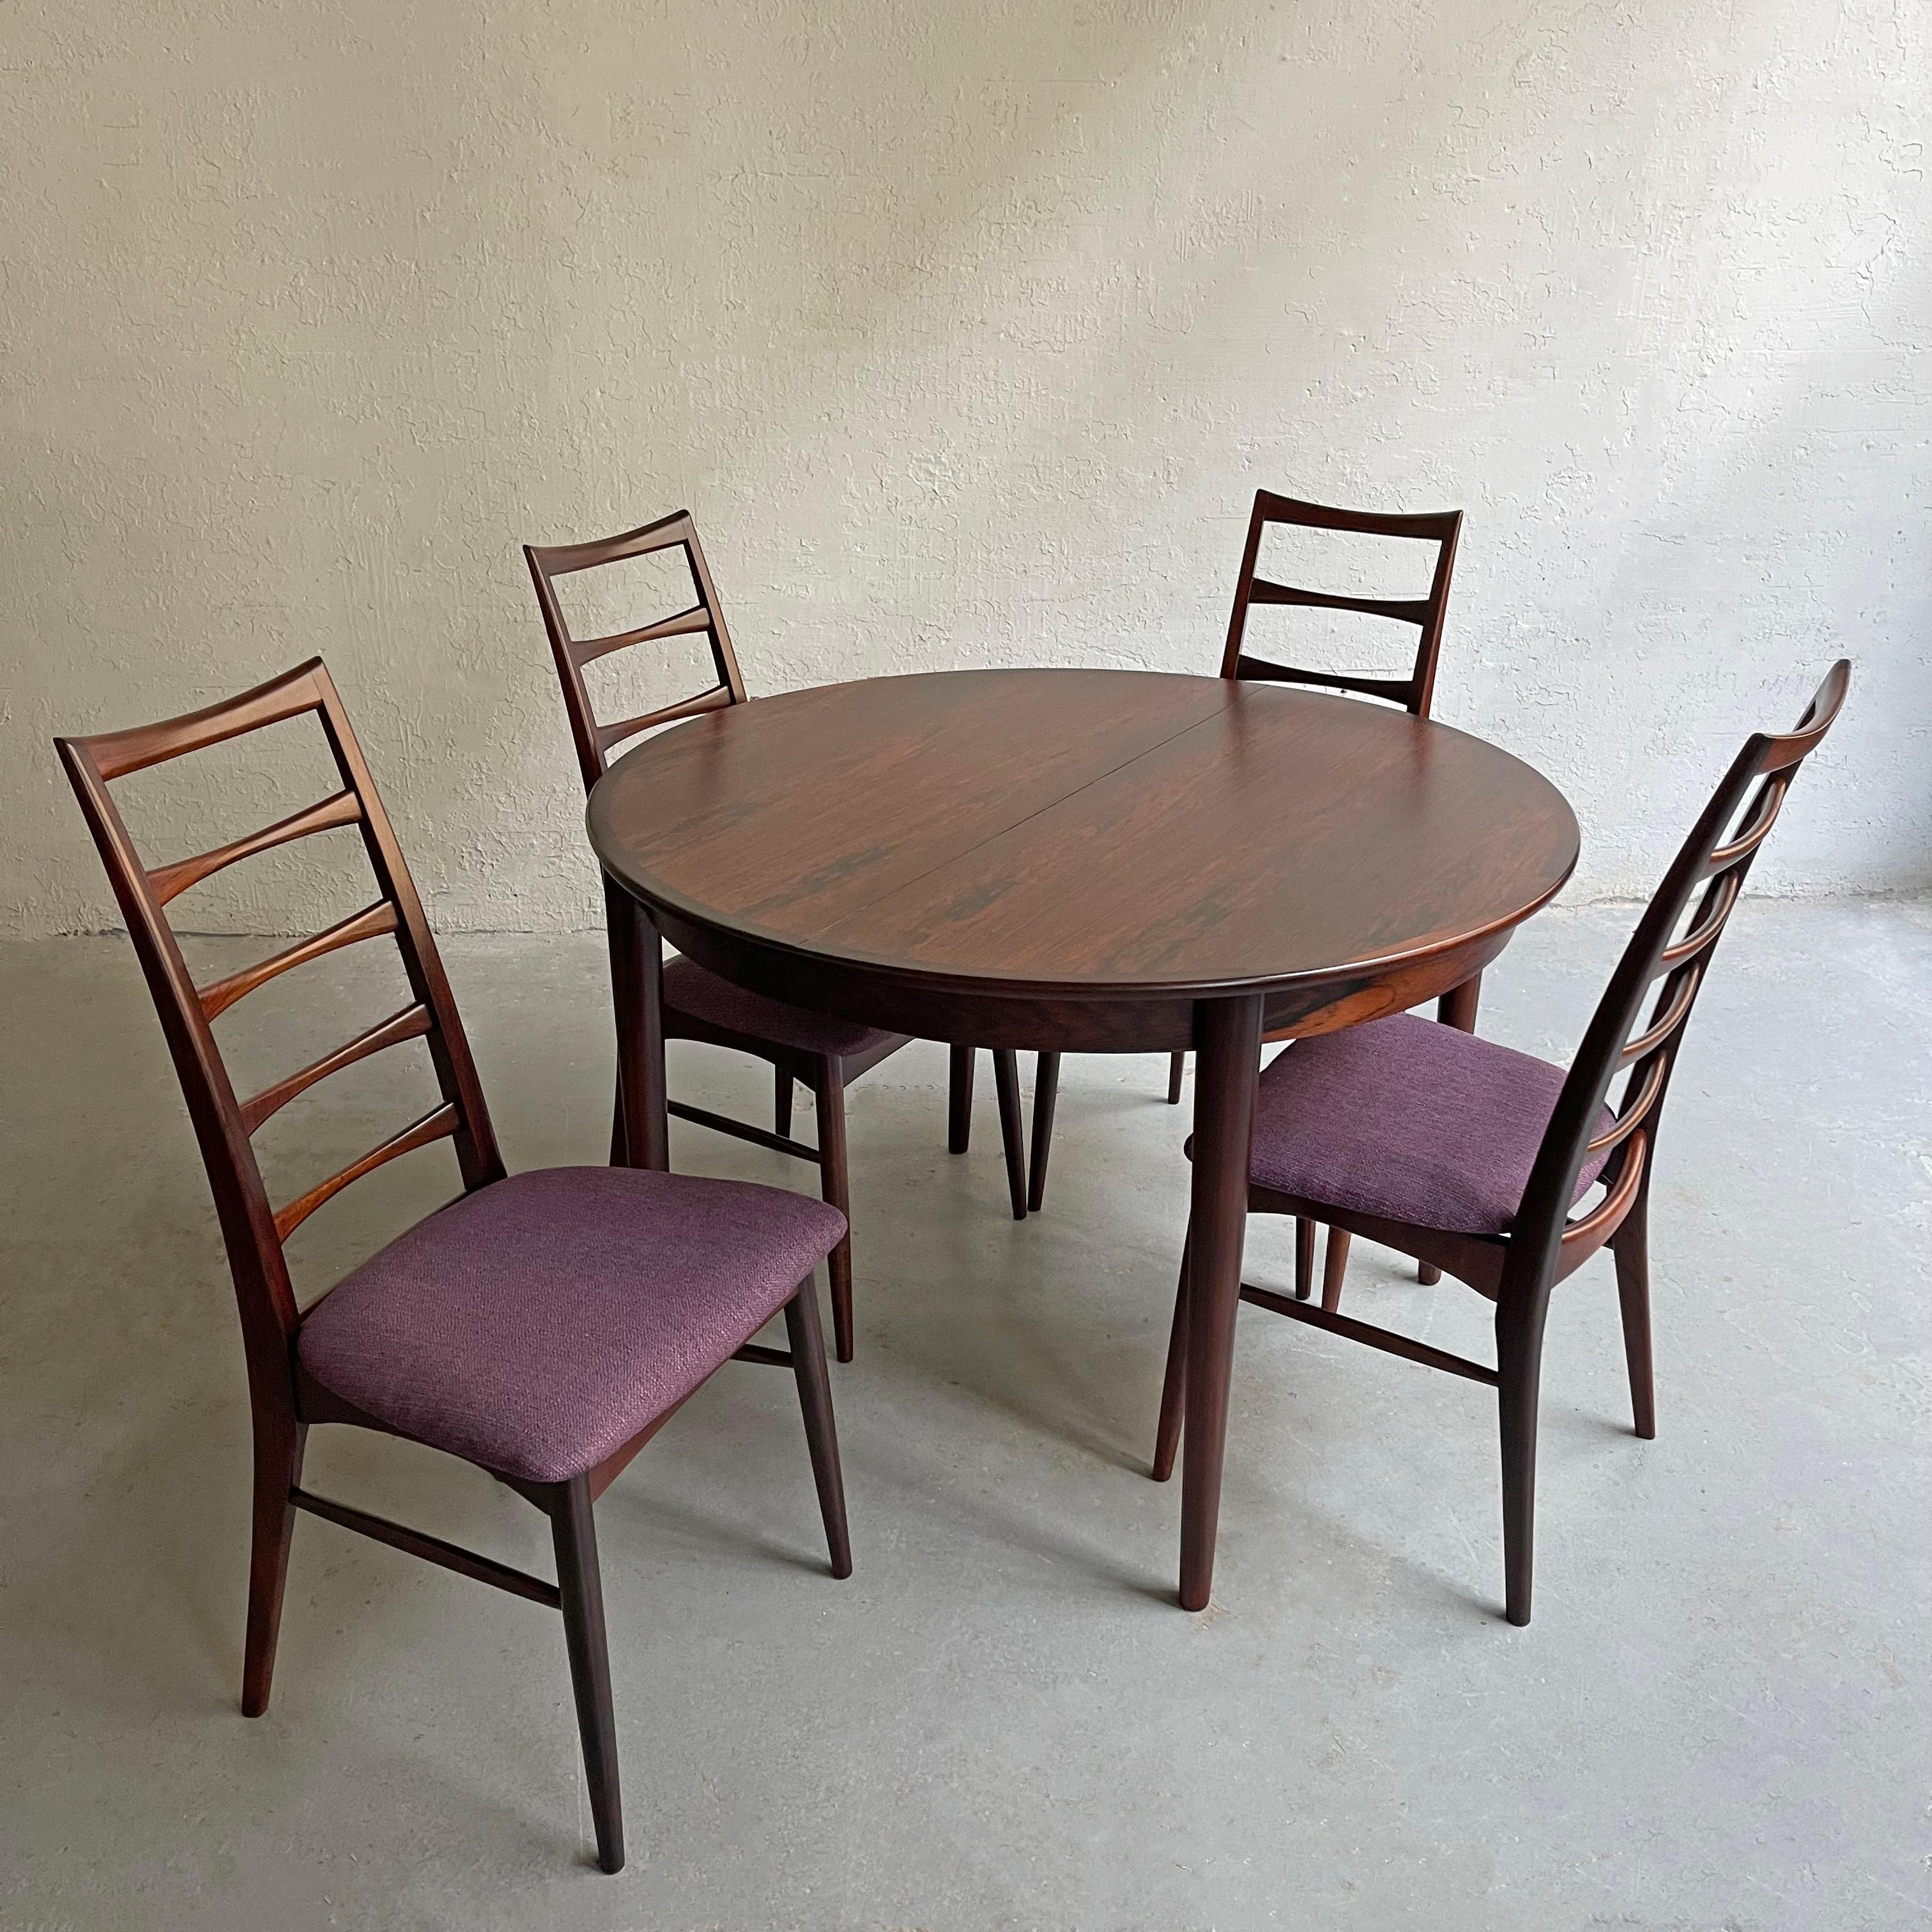 Danish Modern, rosewood dining set by Niels Koefoed, Hornslet Møbelfabrik features a 43 inch round dining table that extends up to 83 inches with two 20 inch leaves and 4 elegant, high ladder back , model 